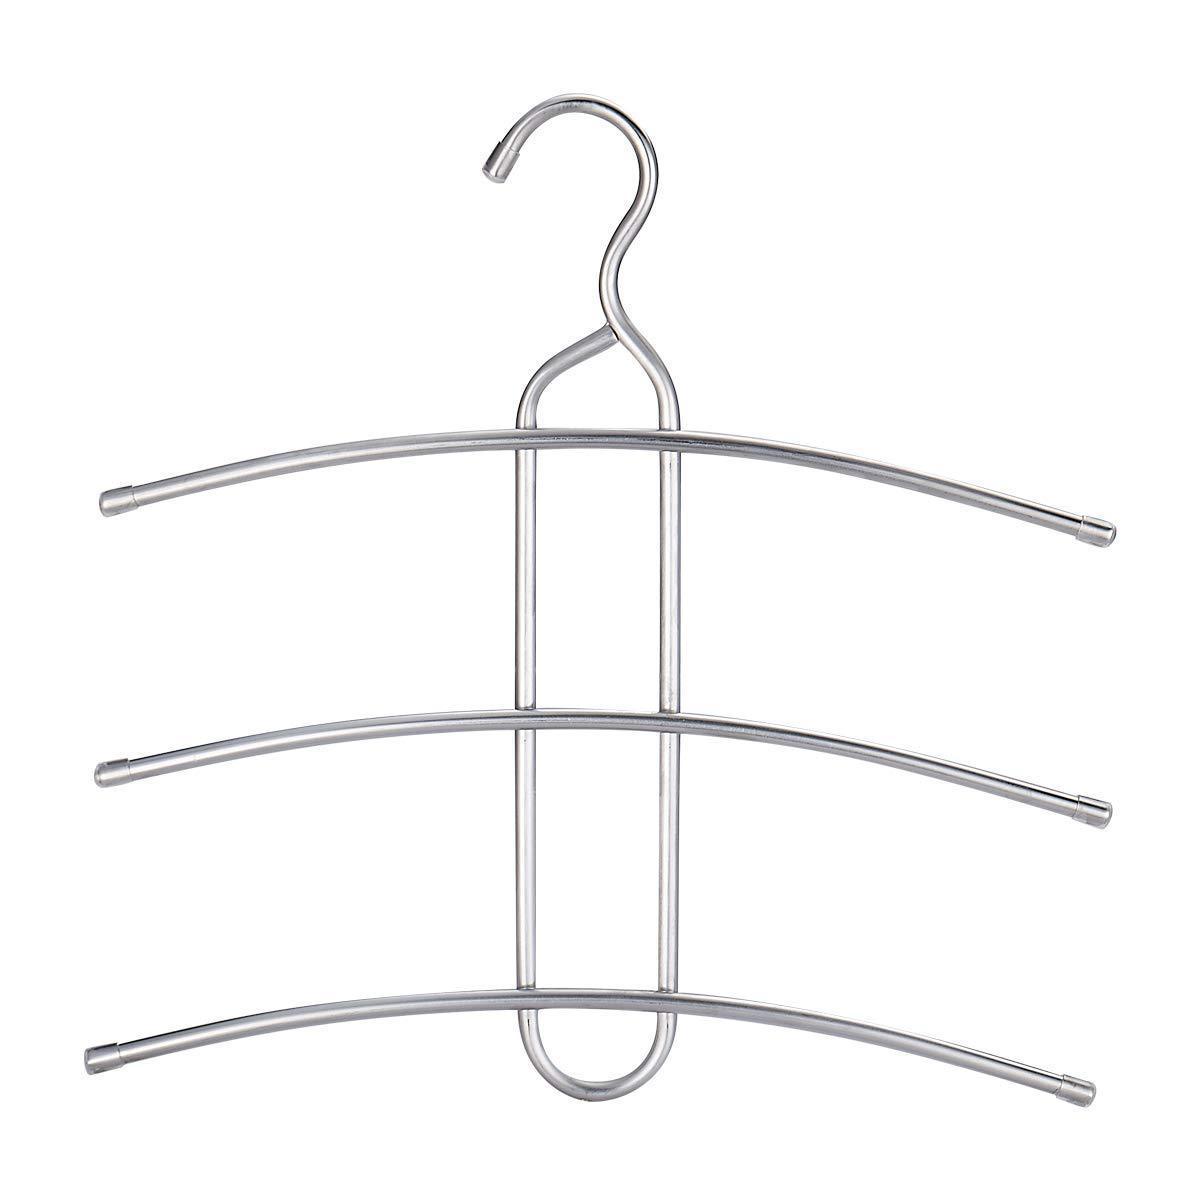 Results doiown multipurpose stainless steel closet hangers blouses shirt dresses scarf hangers organizer set of 3 non slip 3 pieces